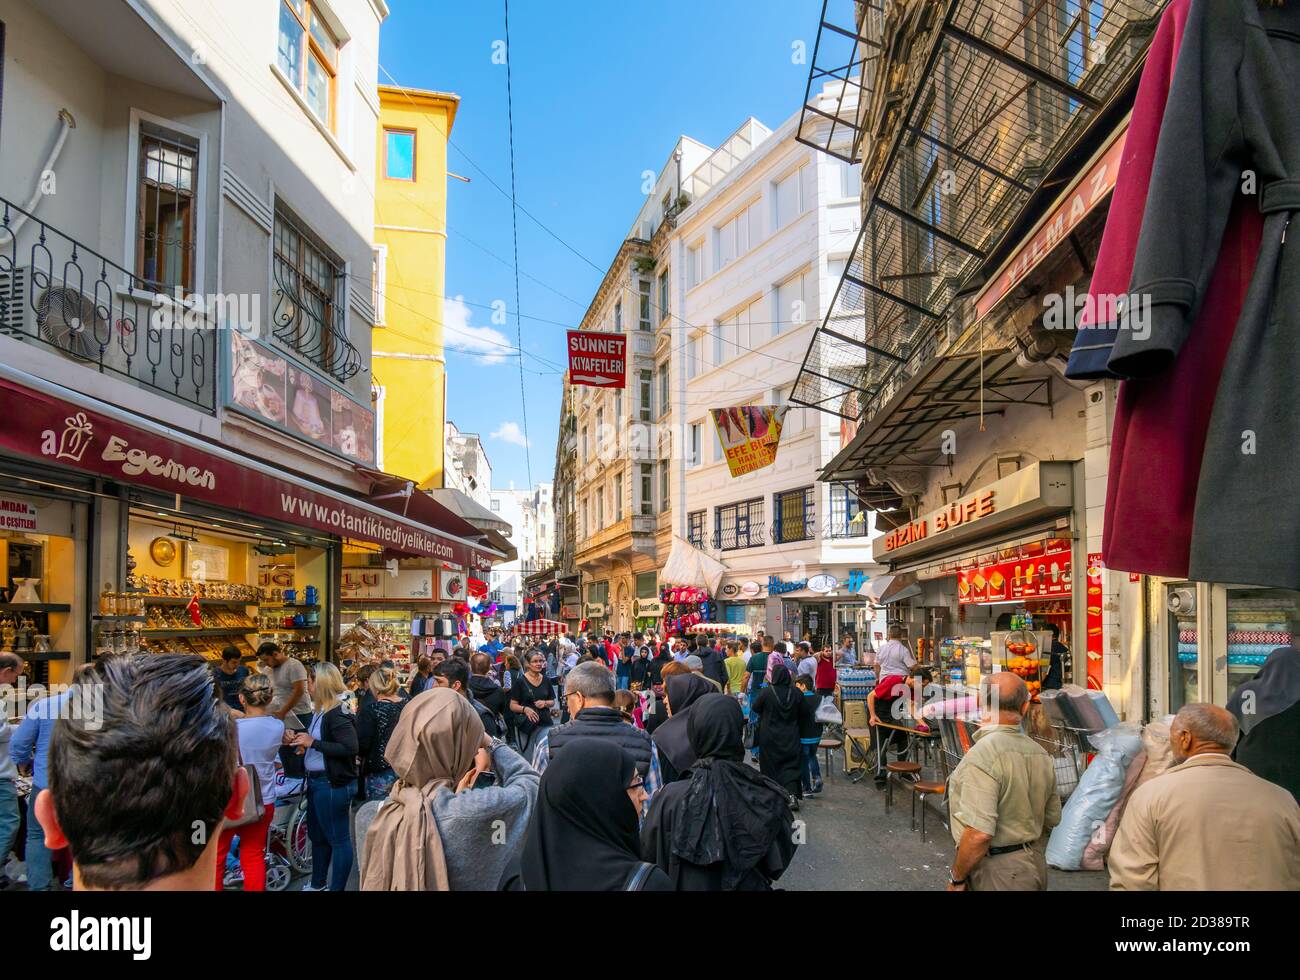 Local Turks and tourists mix as they walk through the outdoor Eminonu Market in Istanbul, Turkey. Stock Photo